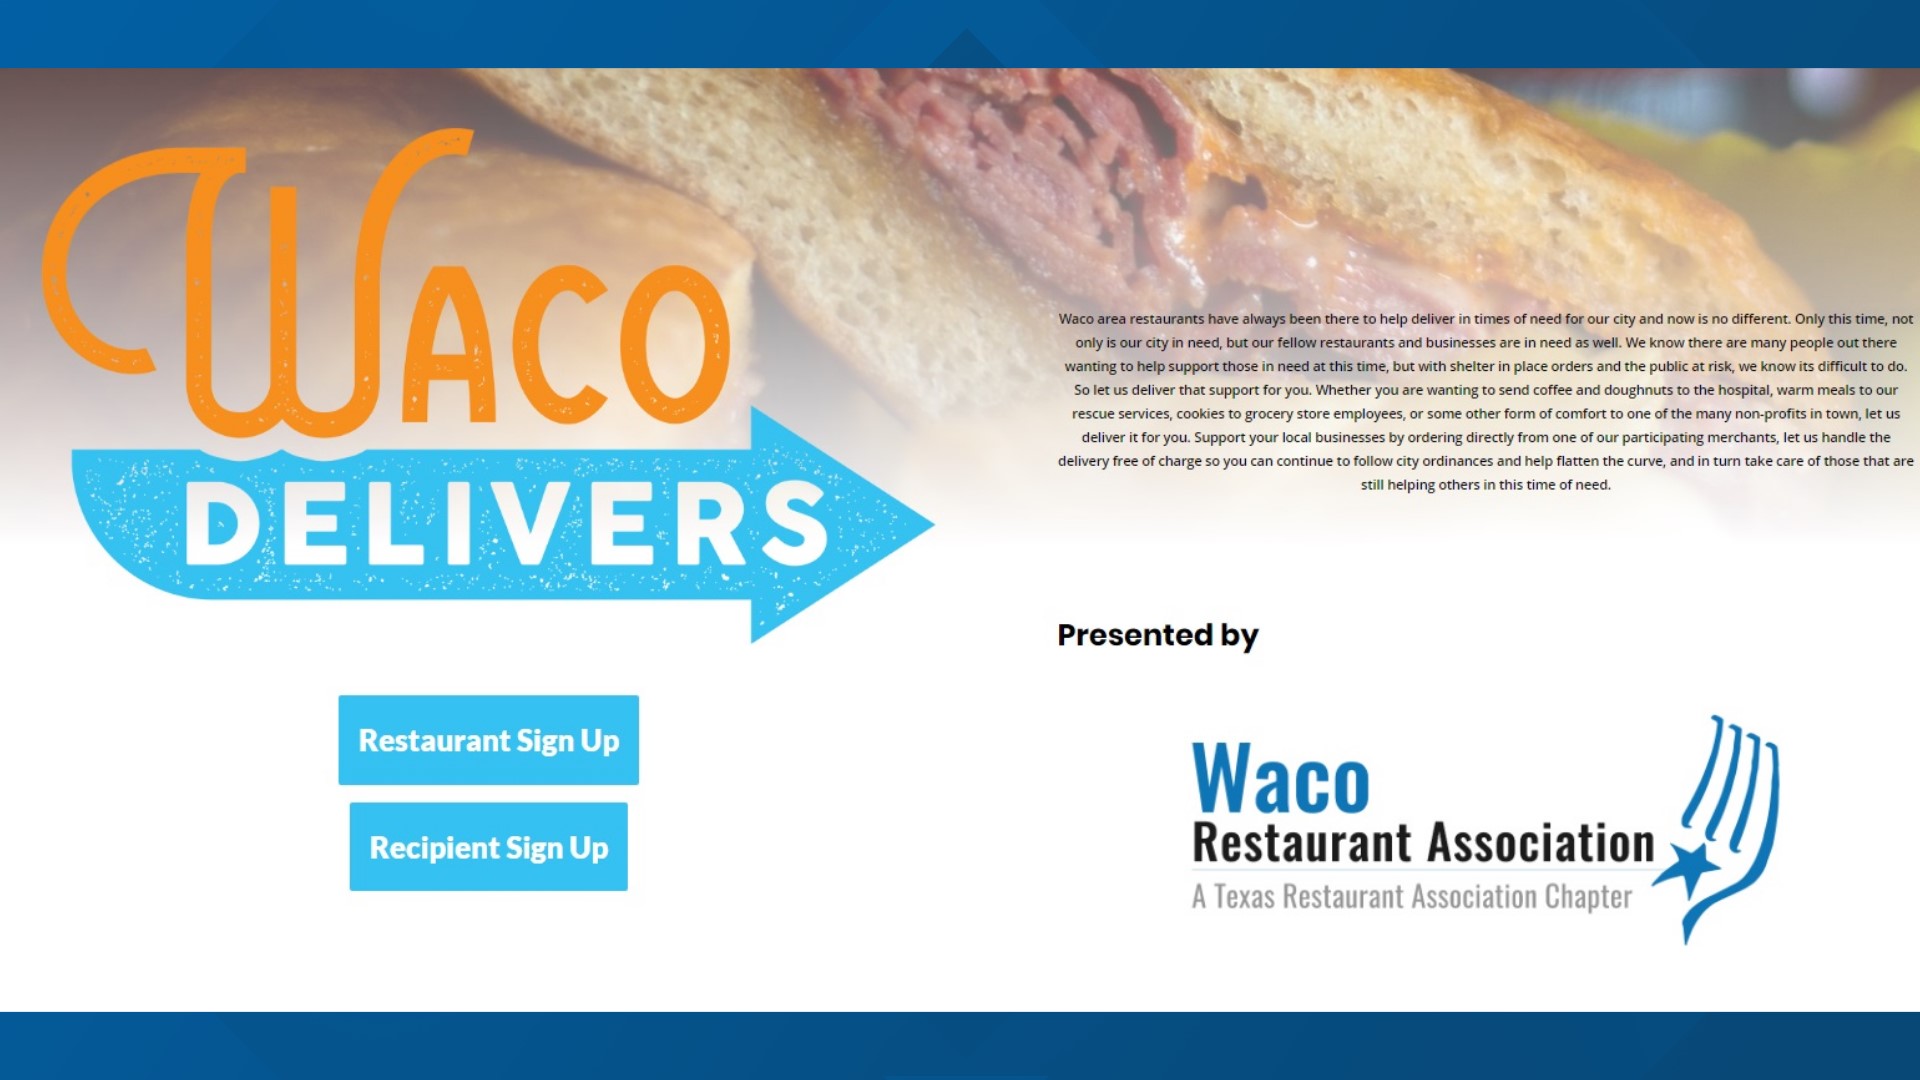 Waco Delivers is a new service by the Waco Restaurants Association to help restaurants and the community as well.